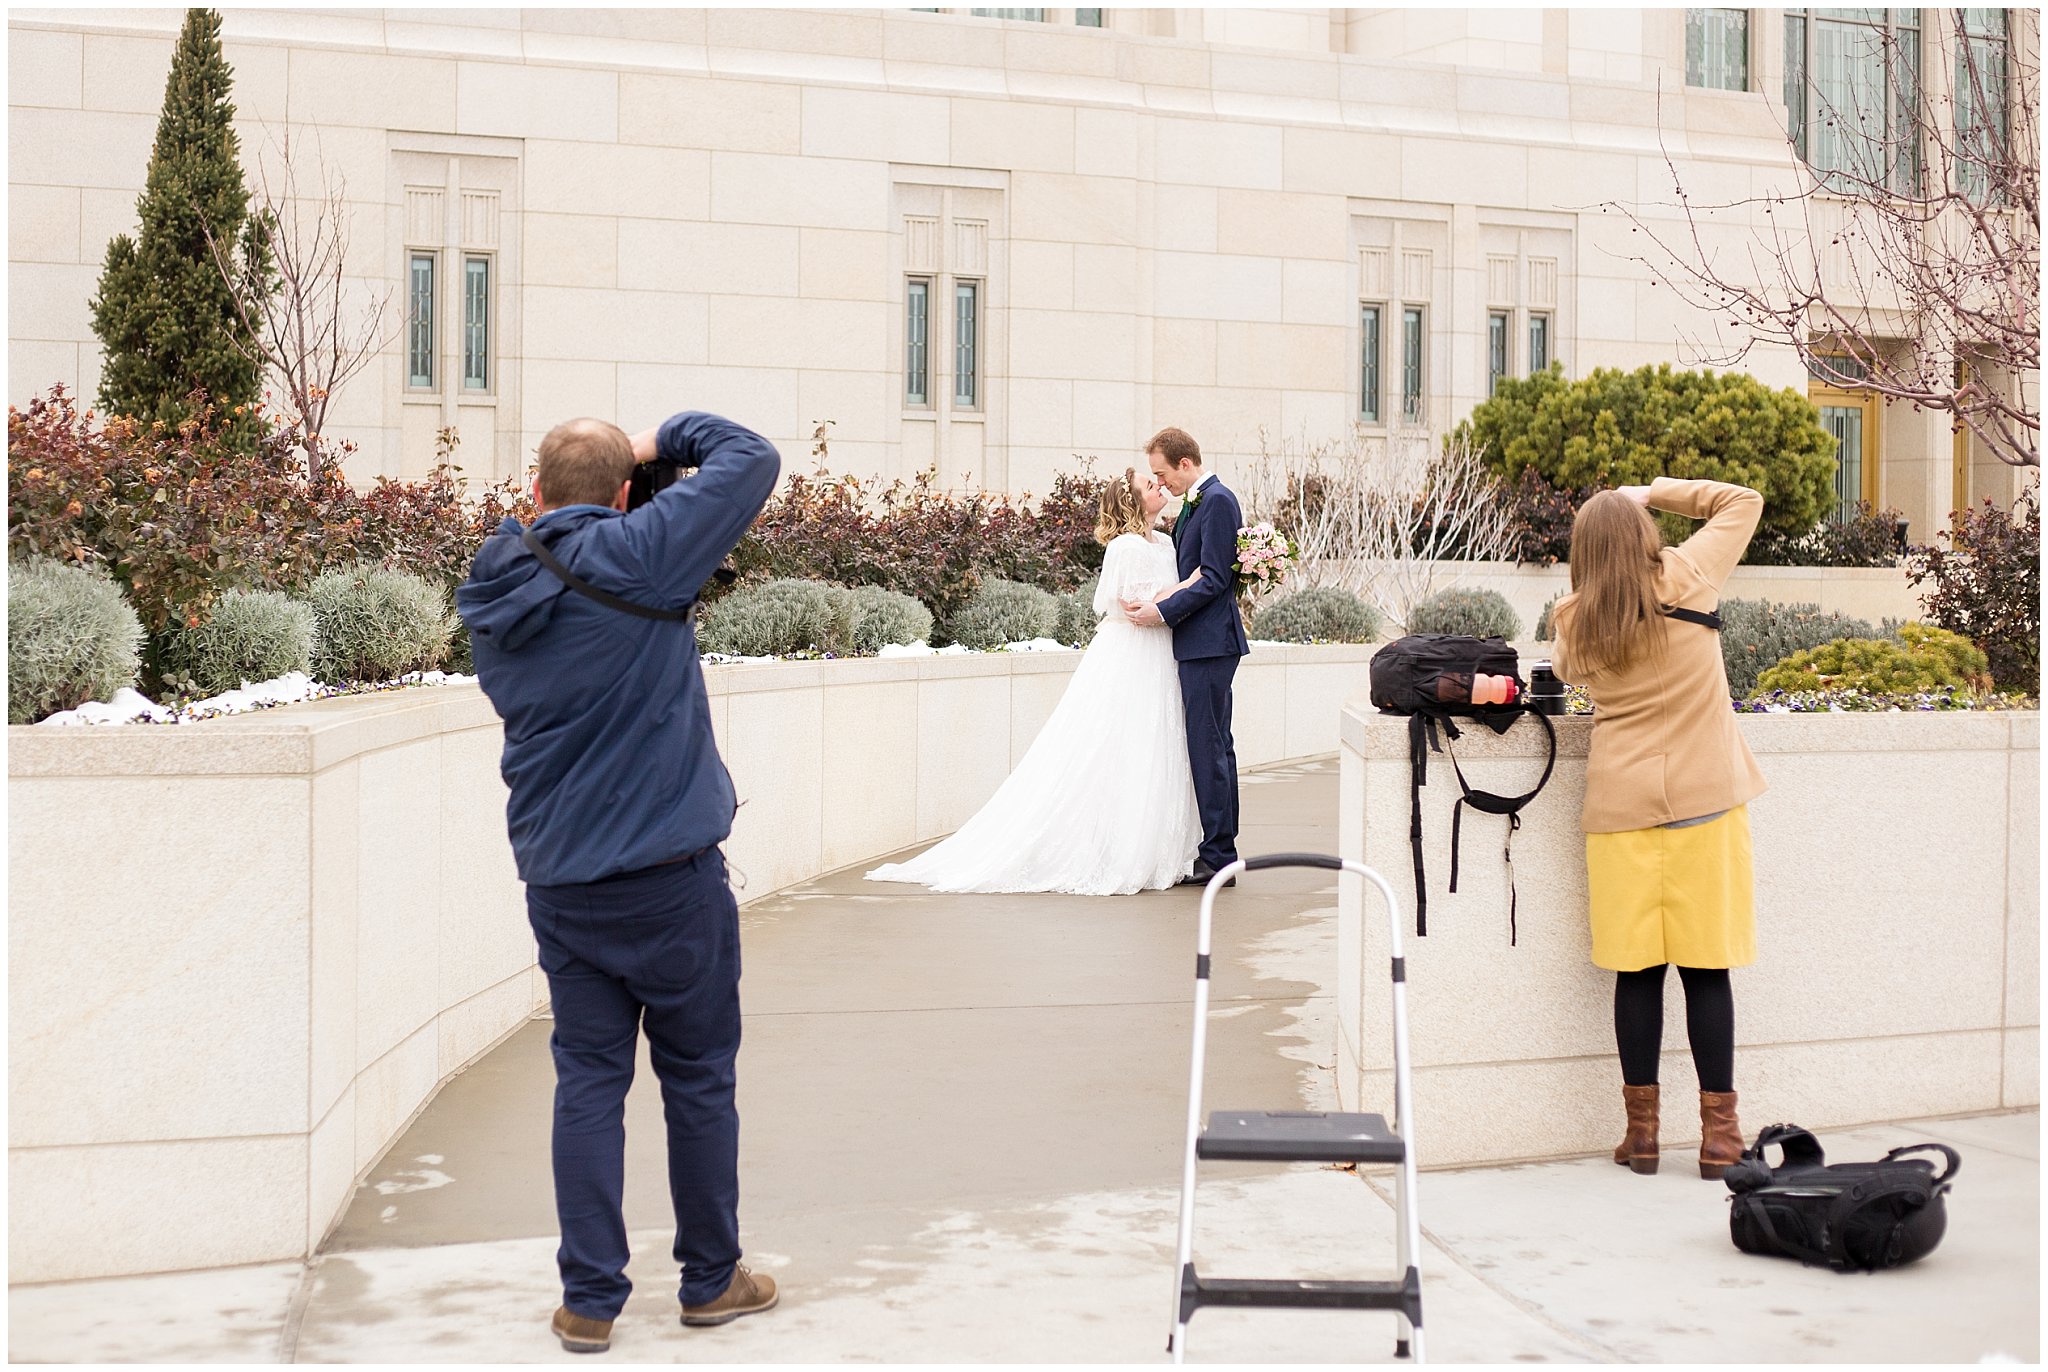 Utah Photographers at the Ogden Temple | Husband and Wife Photography Team | Jessie and Dallin Photography